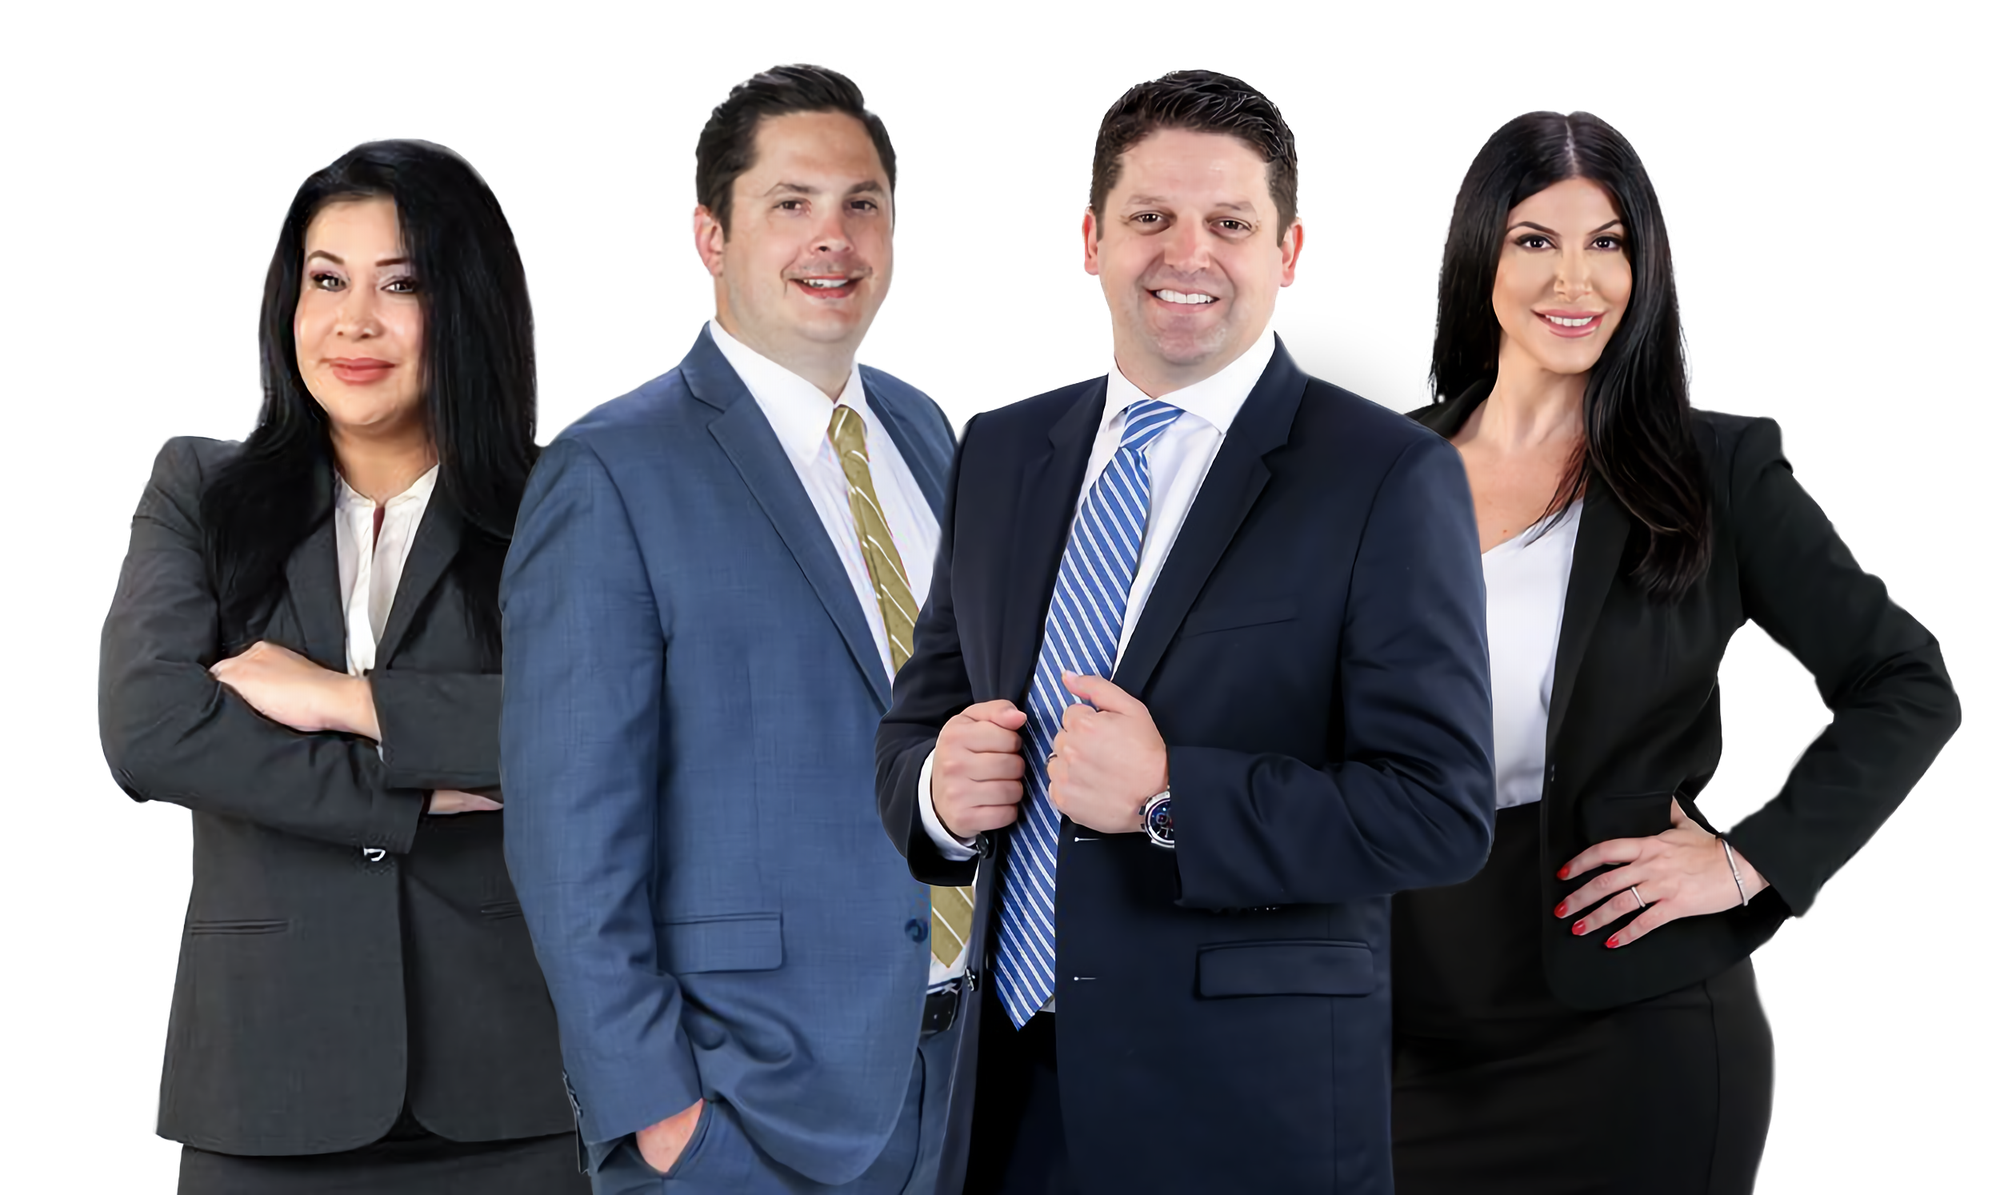 The Wallace Firm Team